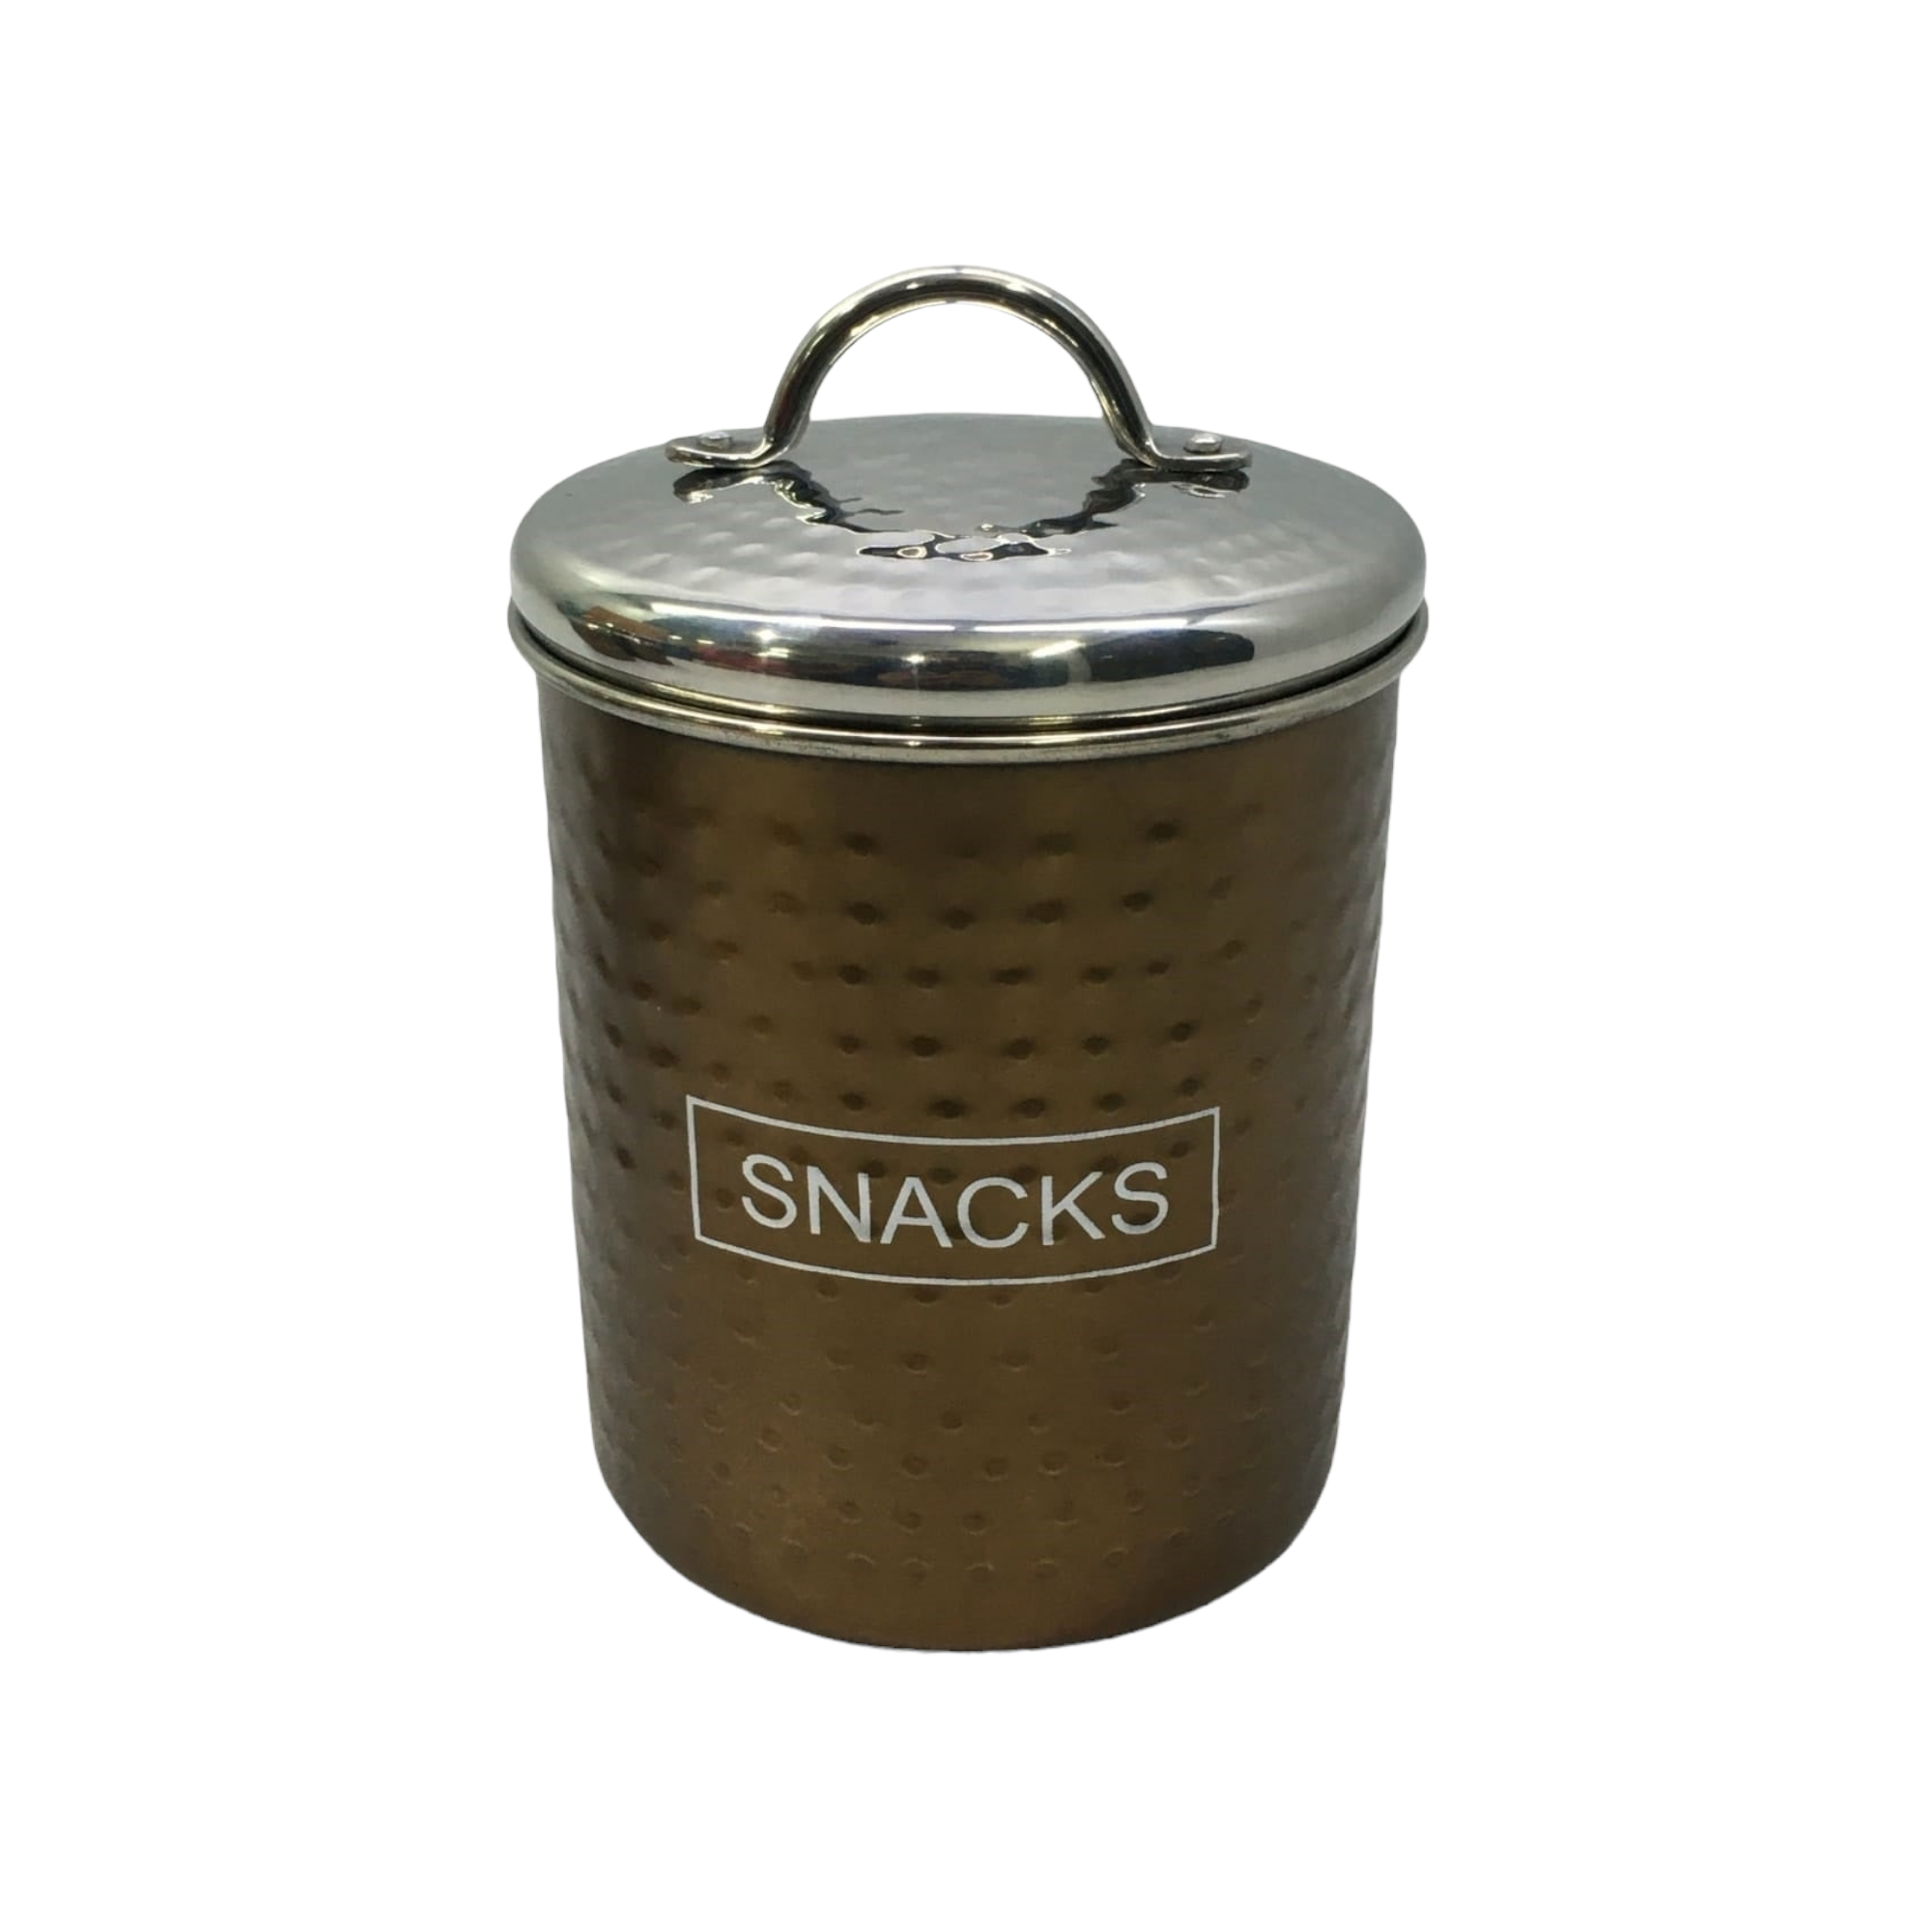 Canister Snack Tin 10x12cm Hammered Finish Stainless Steel